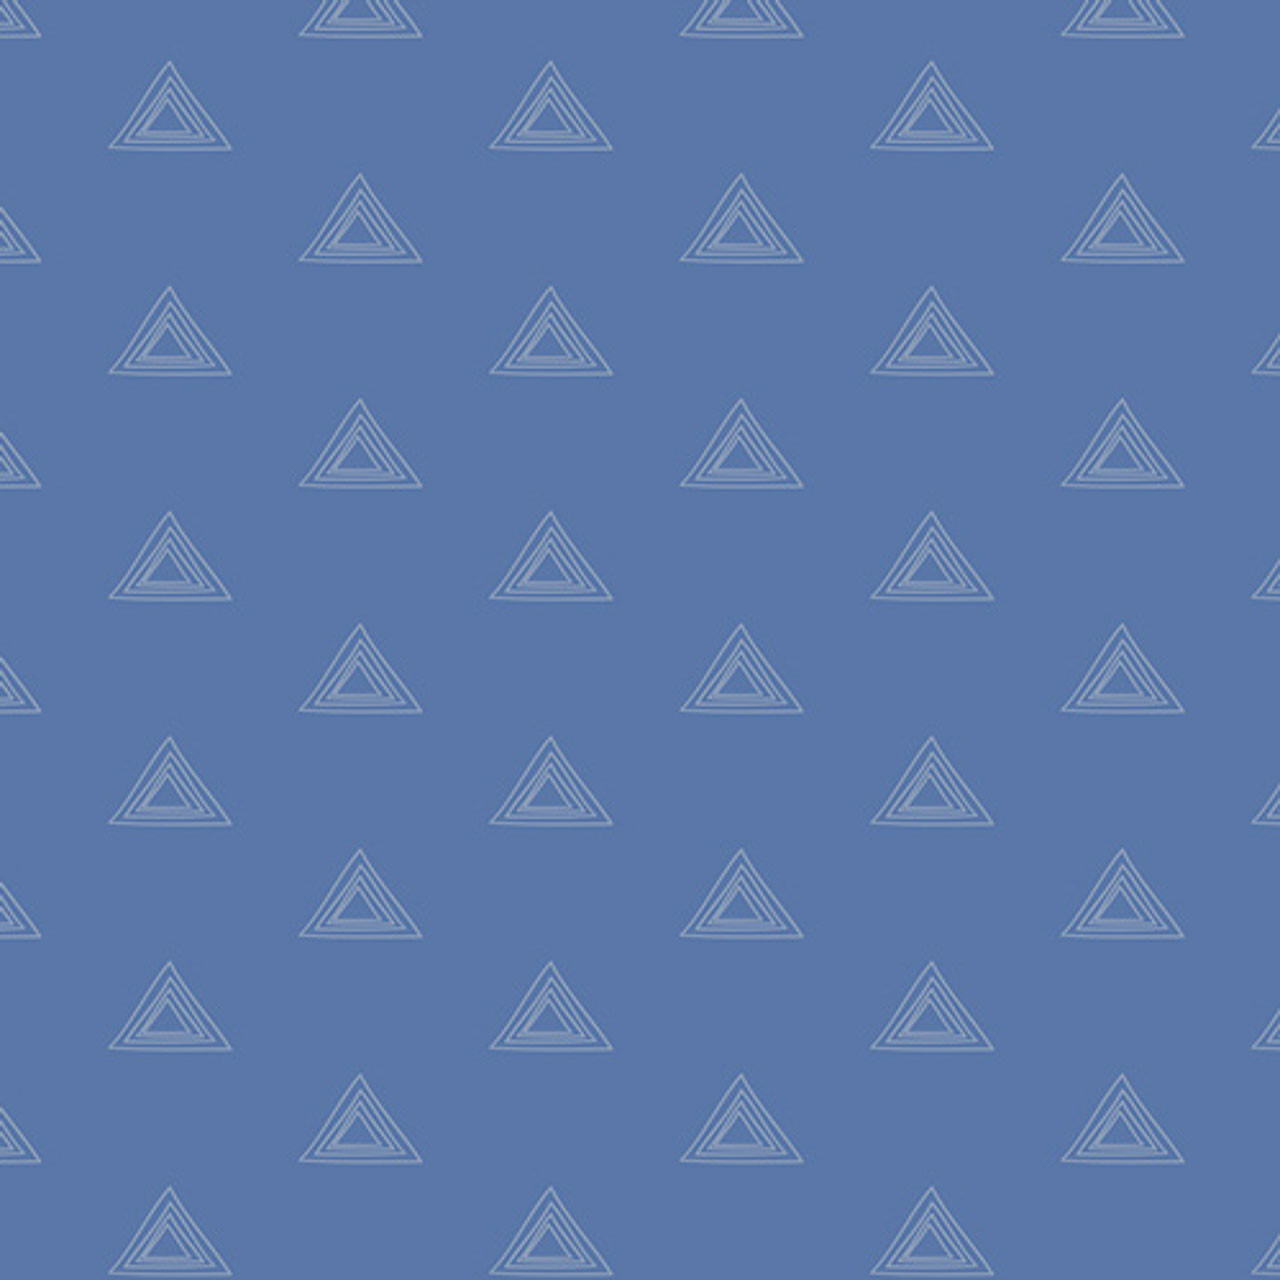 Blue 100% cotton fabric with a geometric triangle pattern from the Prism Elements collection, named Arctic Kyanite.